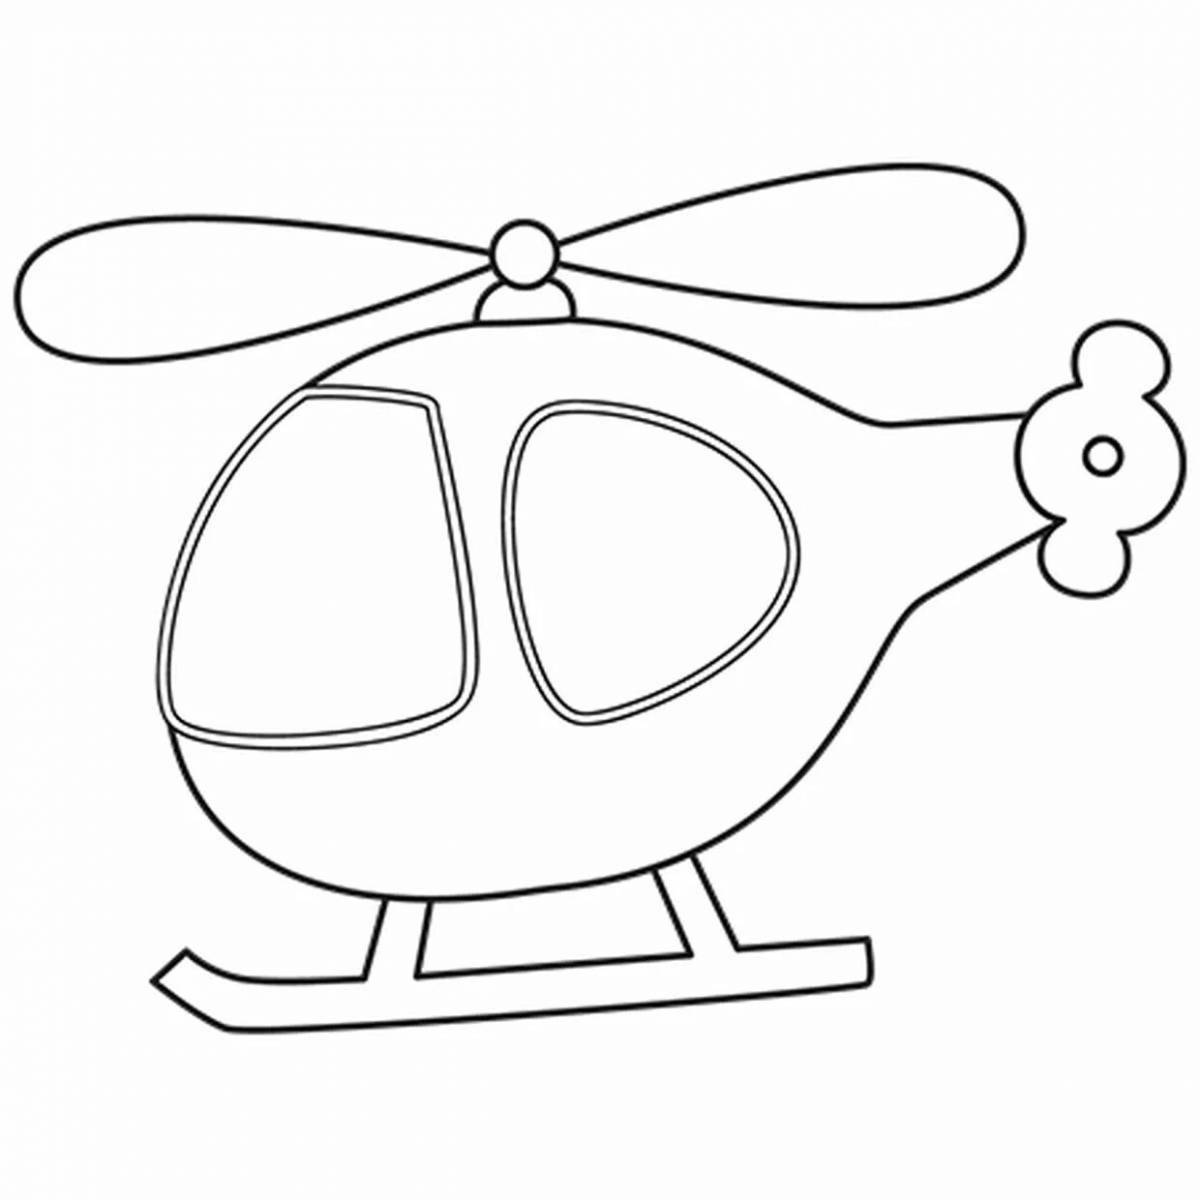 Children's coloring book helicopter in color package